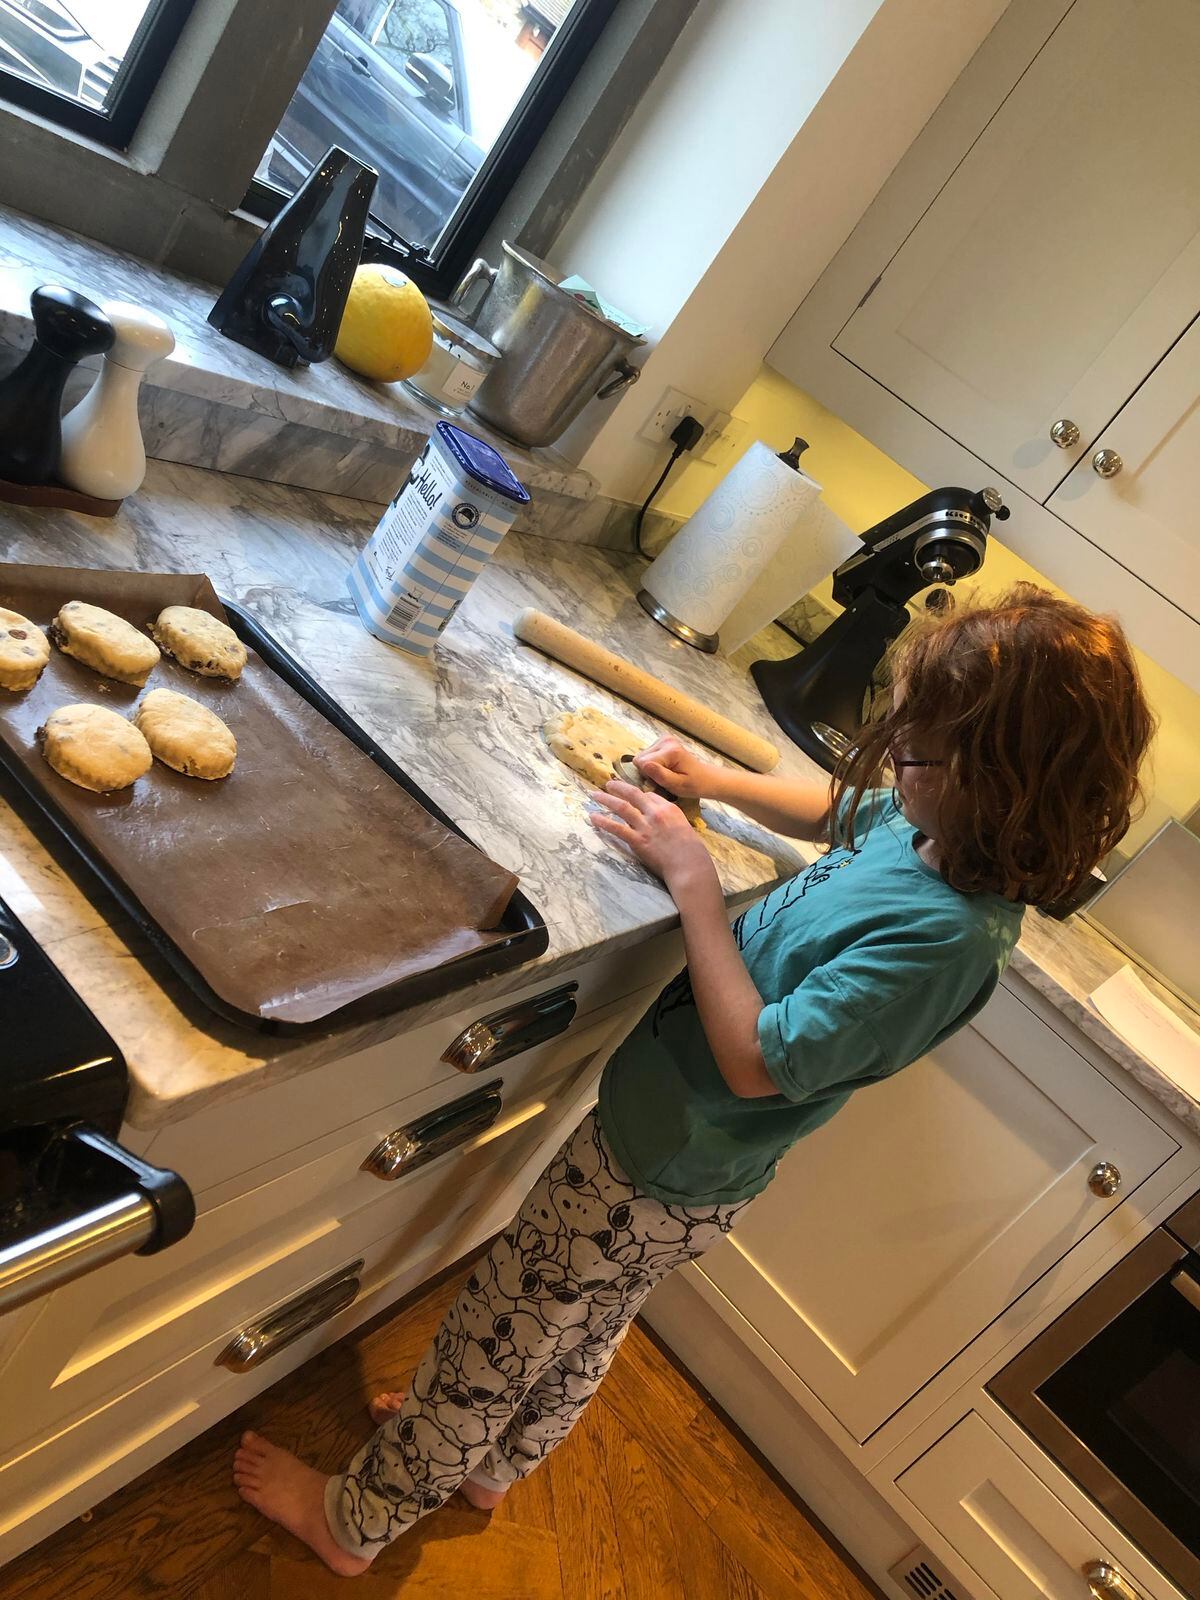 Aine Byrne, aged 9, from Bourton, Much Wenlock,  in the kitchen creating fruit scones